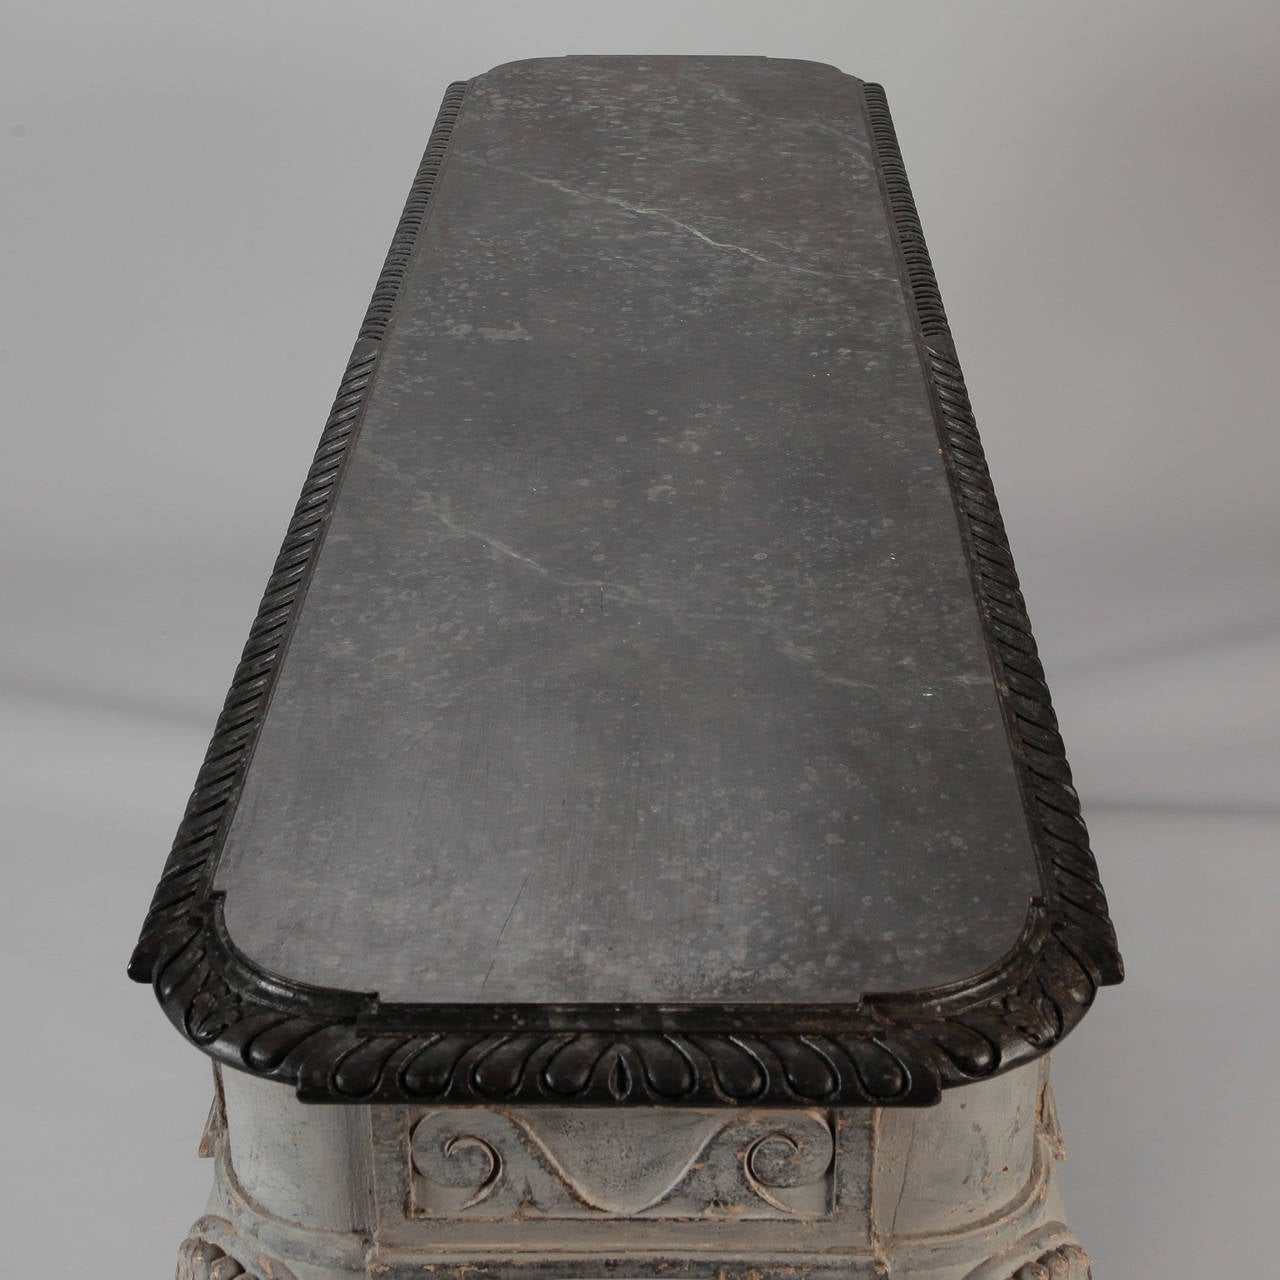 Circa 1900 French console with gray painted finish. Claw and ball feet, cabriole legs with shell form design at knees, carved stylized crested wave border on apron and charcoal faux painted marble finish top with decorative carved border.